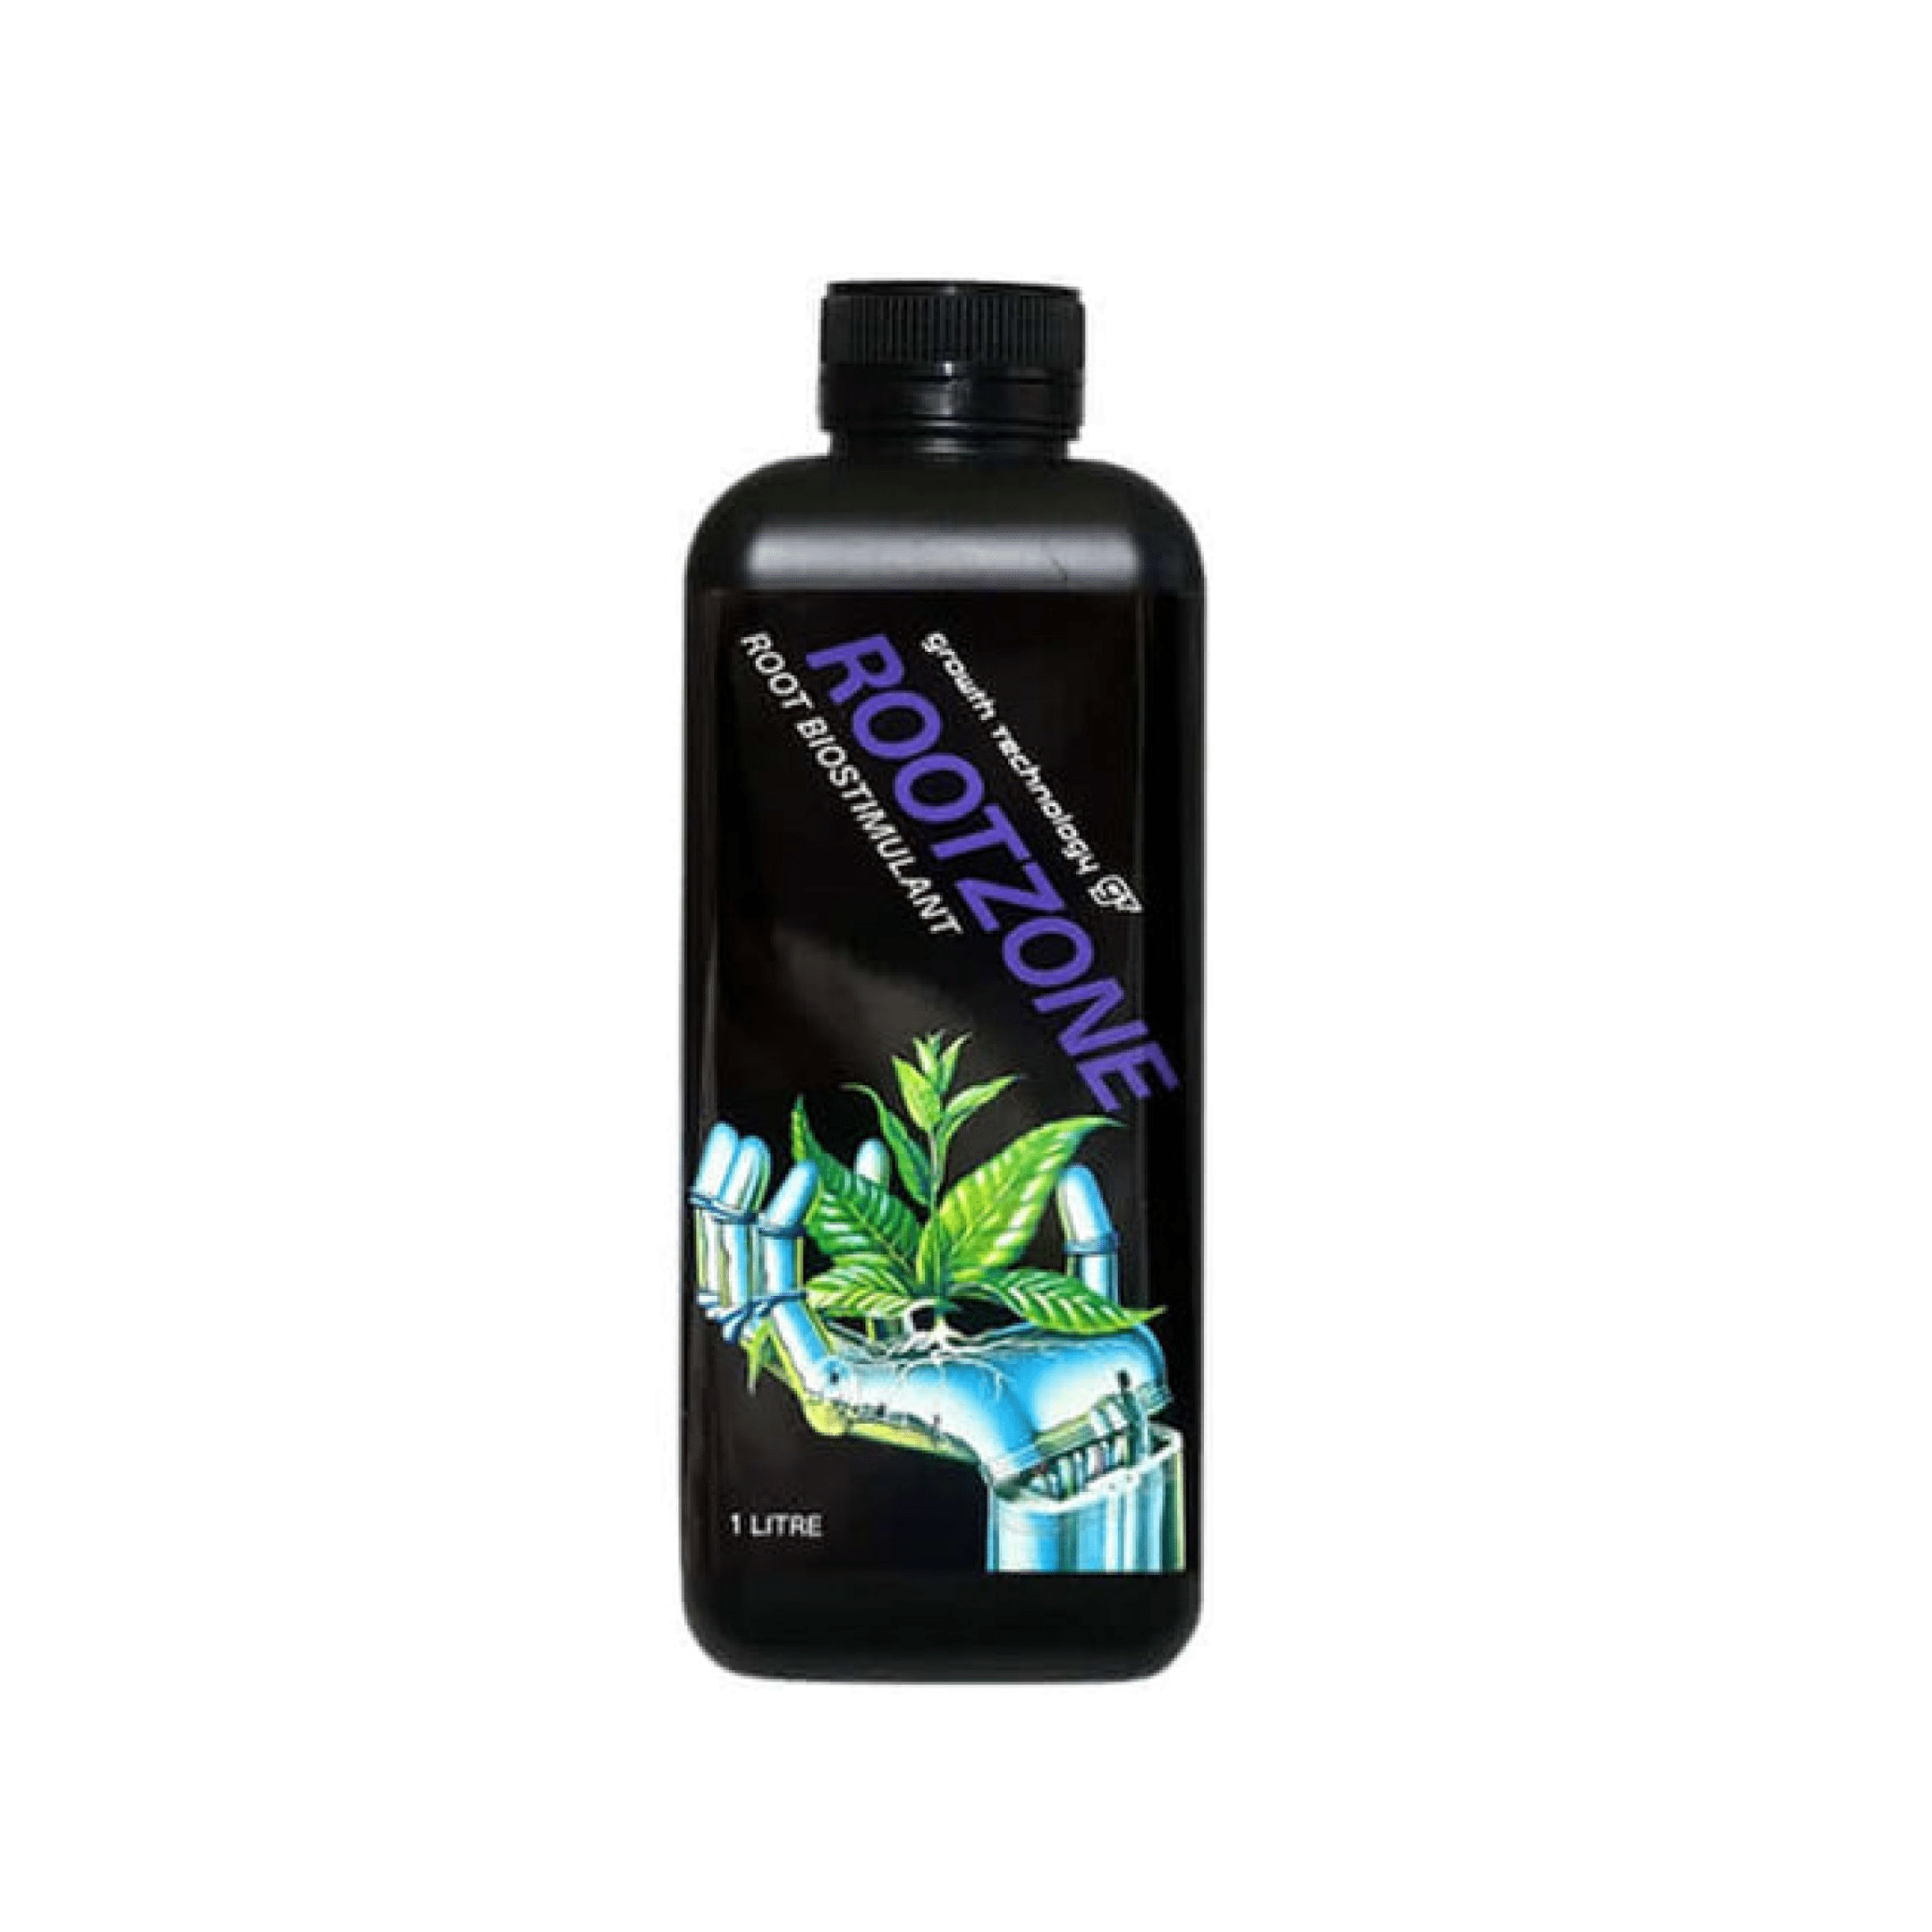 Growth Technology Hydroponic Supplies > Hydroponic Nutrients > Base Nutrients 1L Growth Technology Root Zone (250ml / 1L)